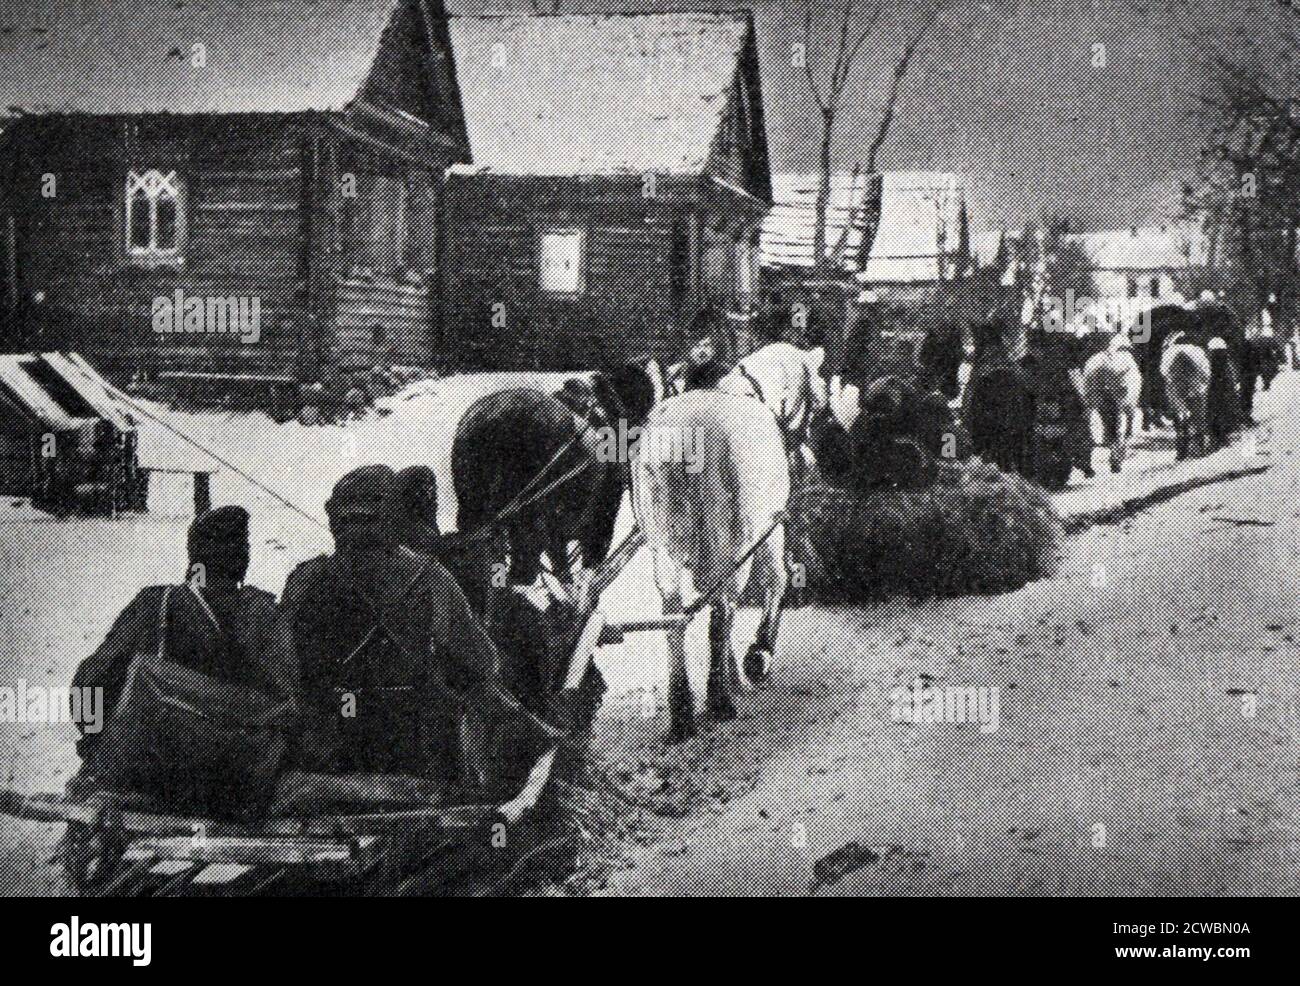 Black and white photograph of World War II (1939-1945); on the Russian front in the lead up to winter 1942. German soldiers advance through the snow and a glacial cold spell on horse-drawn sleds. Stock Photo